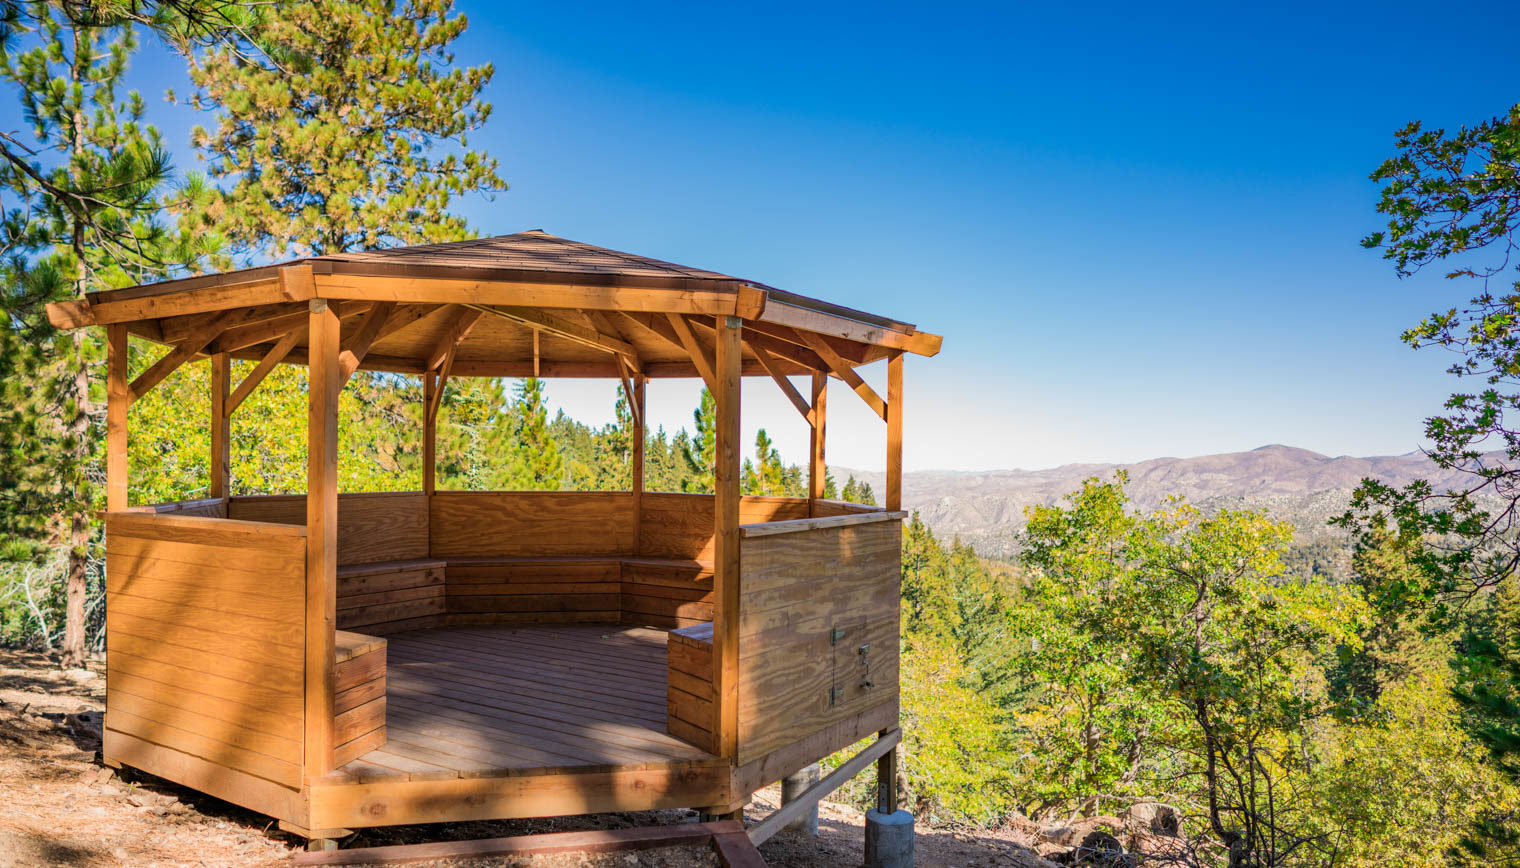 A gazebo overlooking a forest.